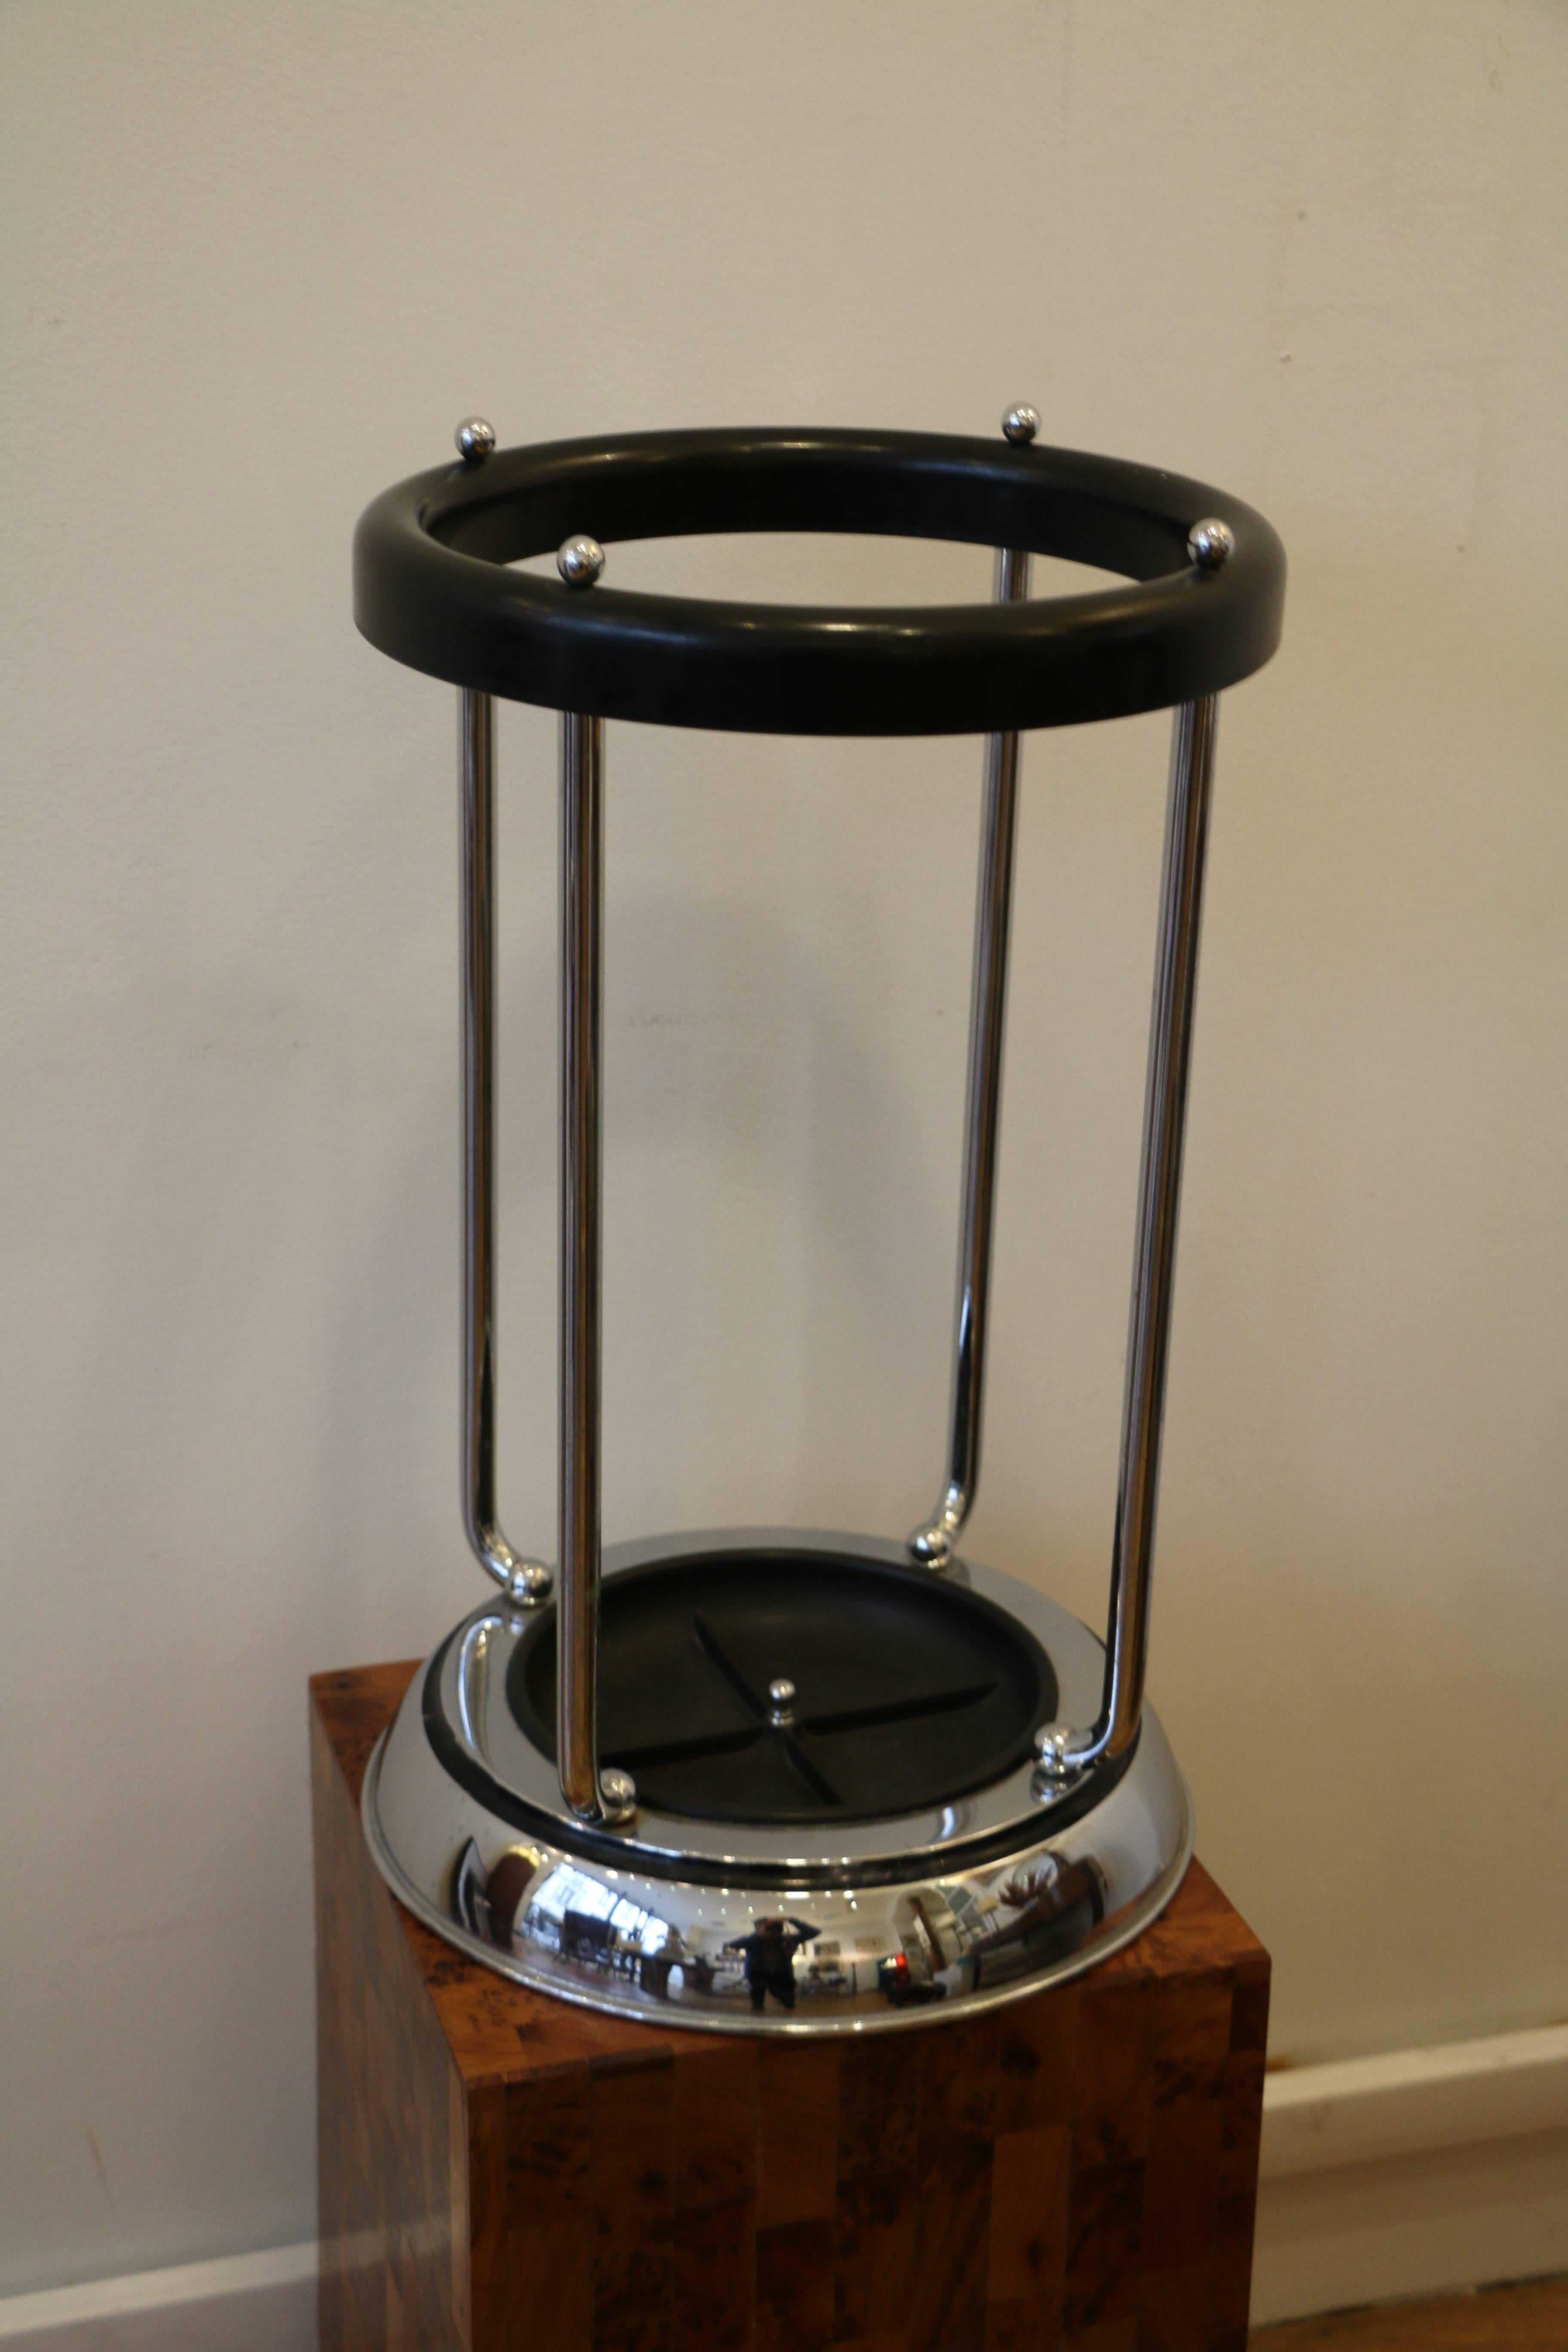 Modernist umbrella stand made of chromium-plated metal and black bakelite. Very good condition. Art Deco. Probably made in Belgium.